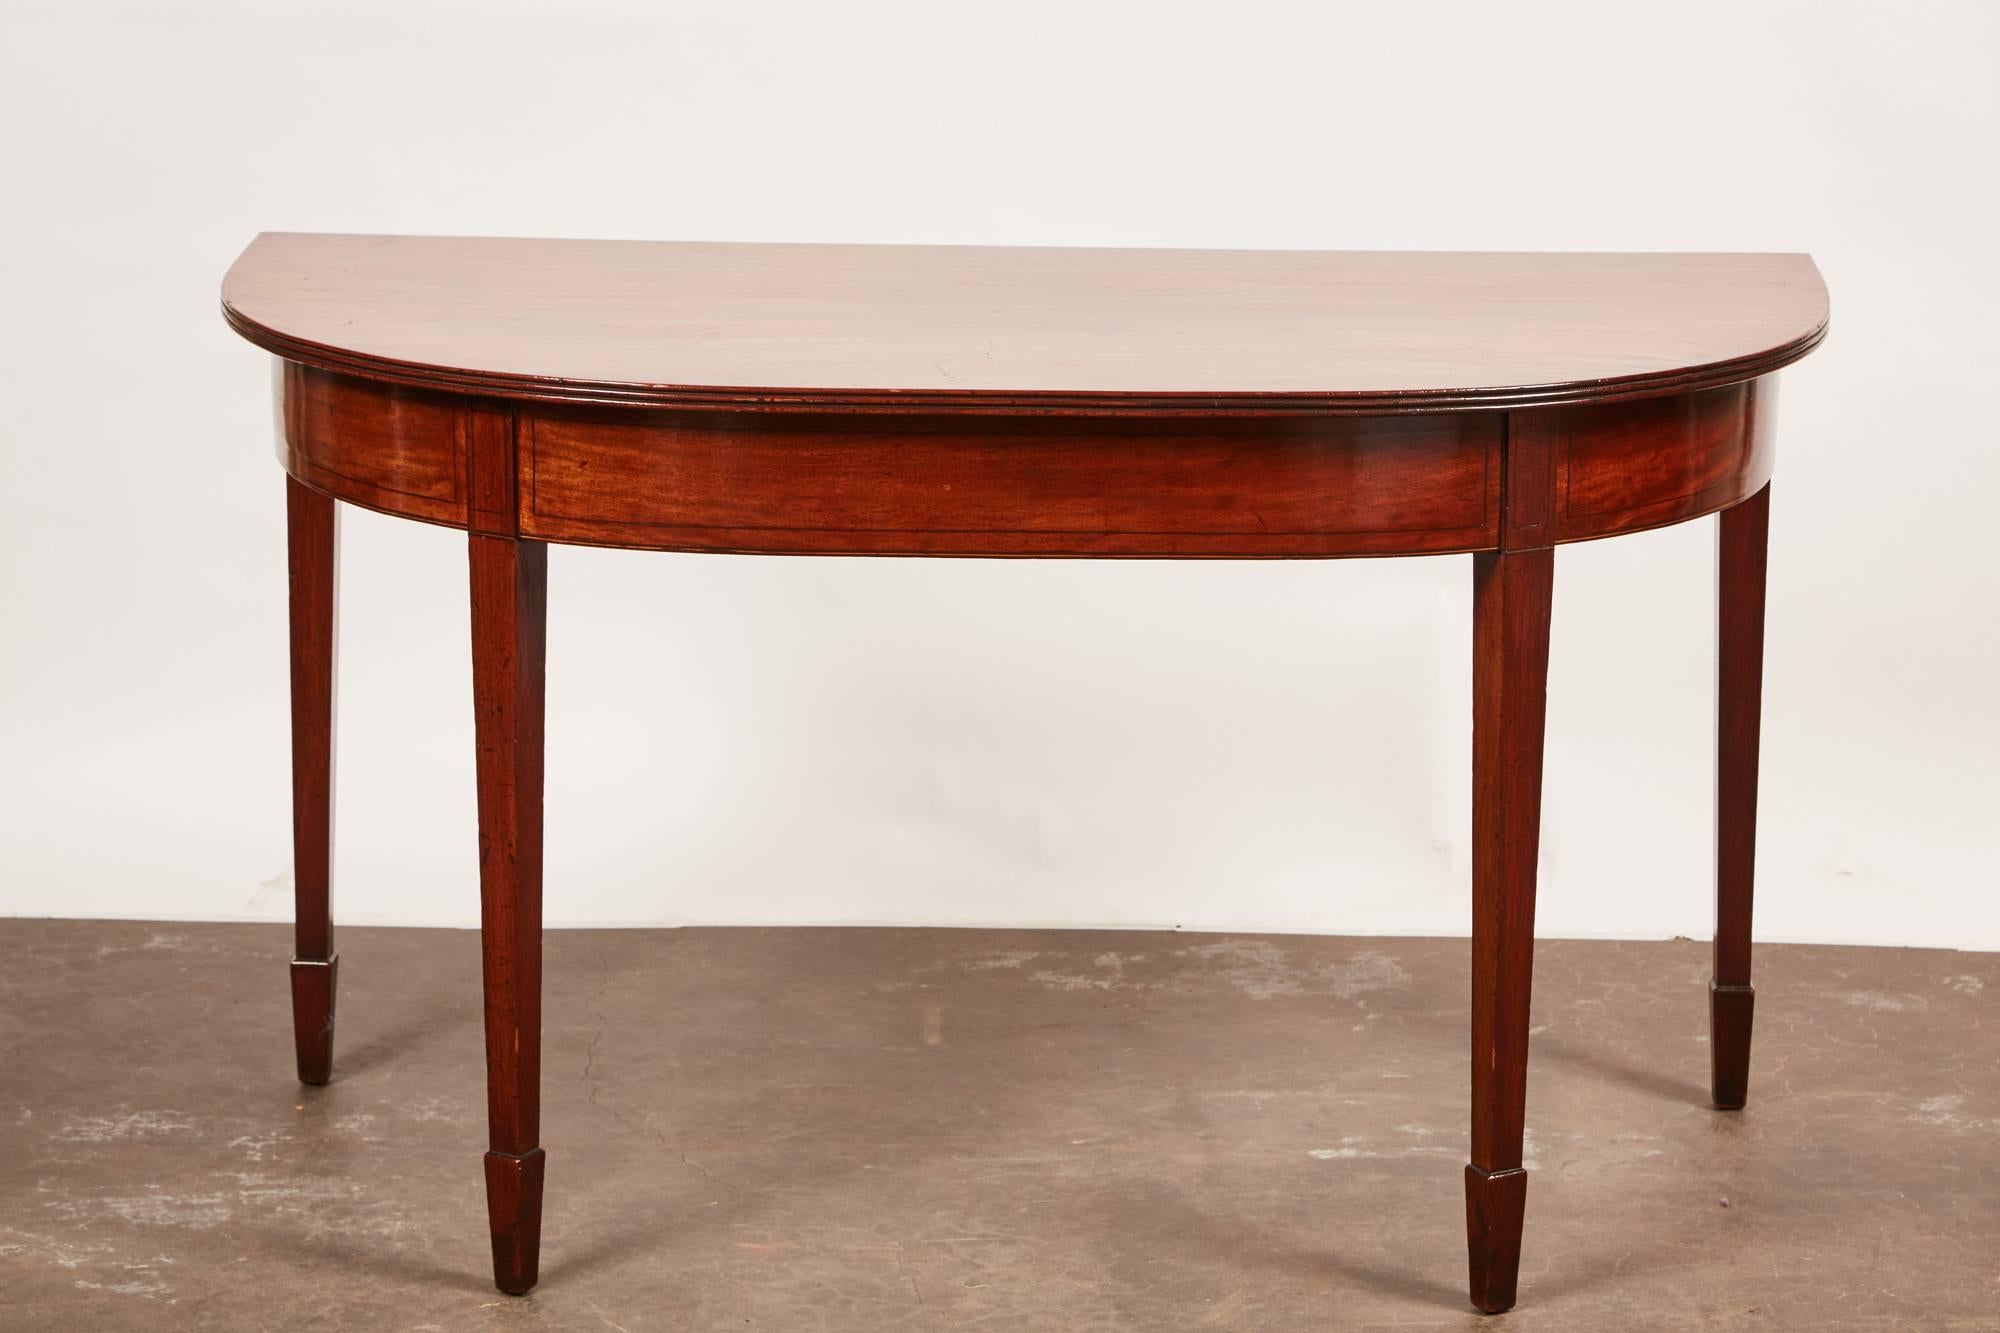 A remarkable pair of D-shaped Georgian mahogany console tables with clean and simple lines.